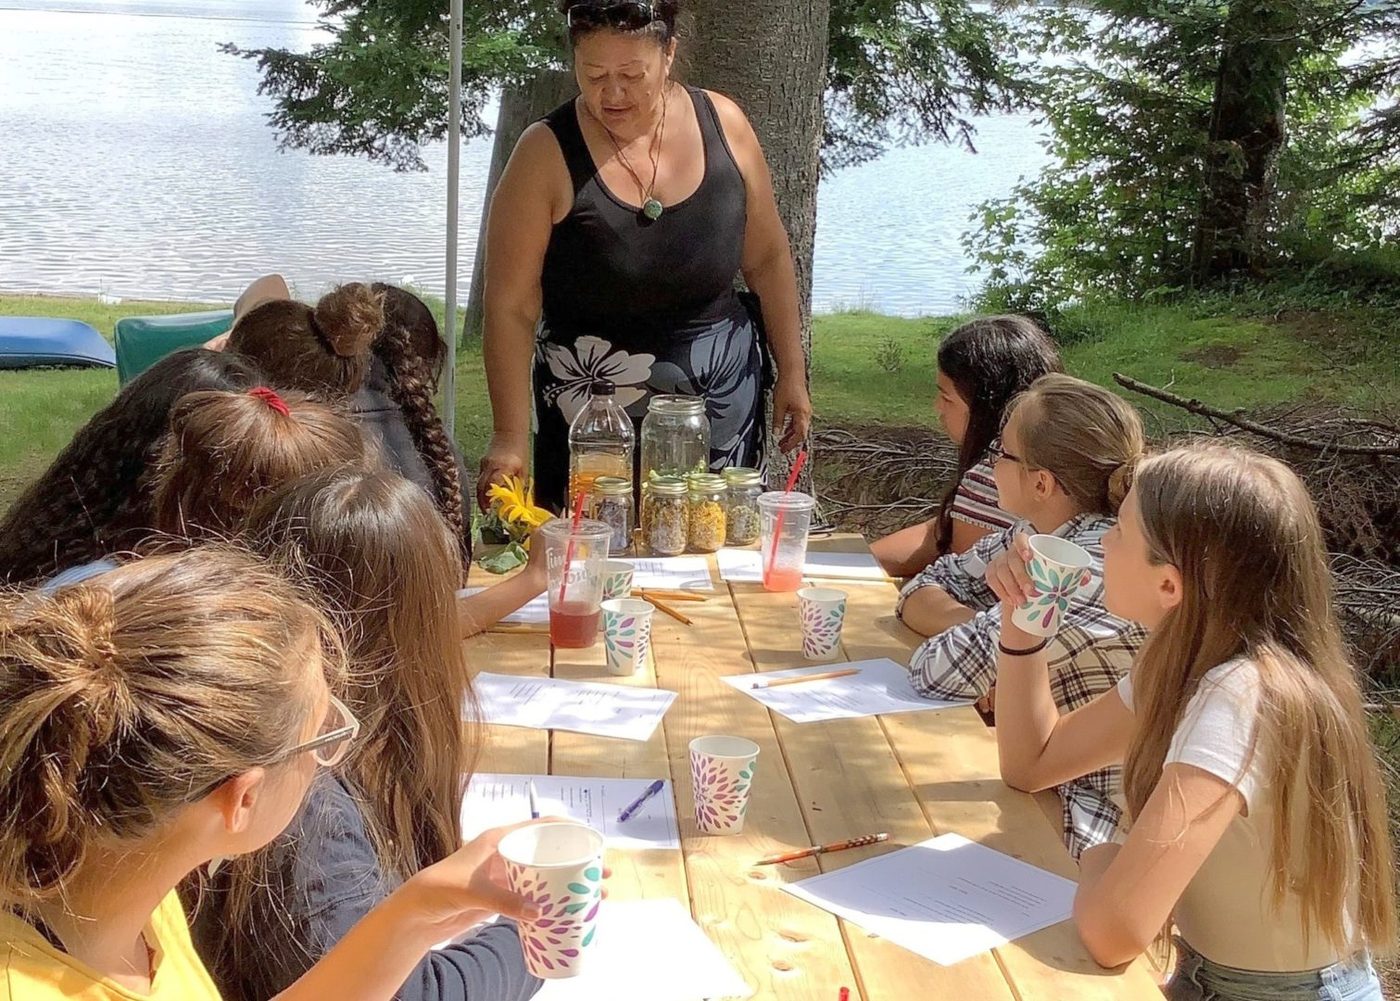 The St. Regis Mohawk Tribe in Akwesasne has been working for years to save its native language. The number of Mohawk speakers has been declining for the last century, but new language immersion programs on the reservation are working to reverse that trend.